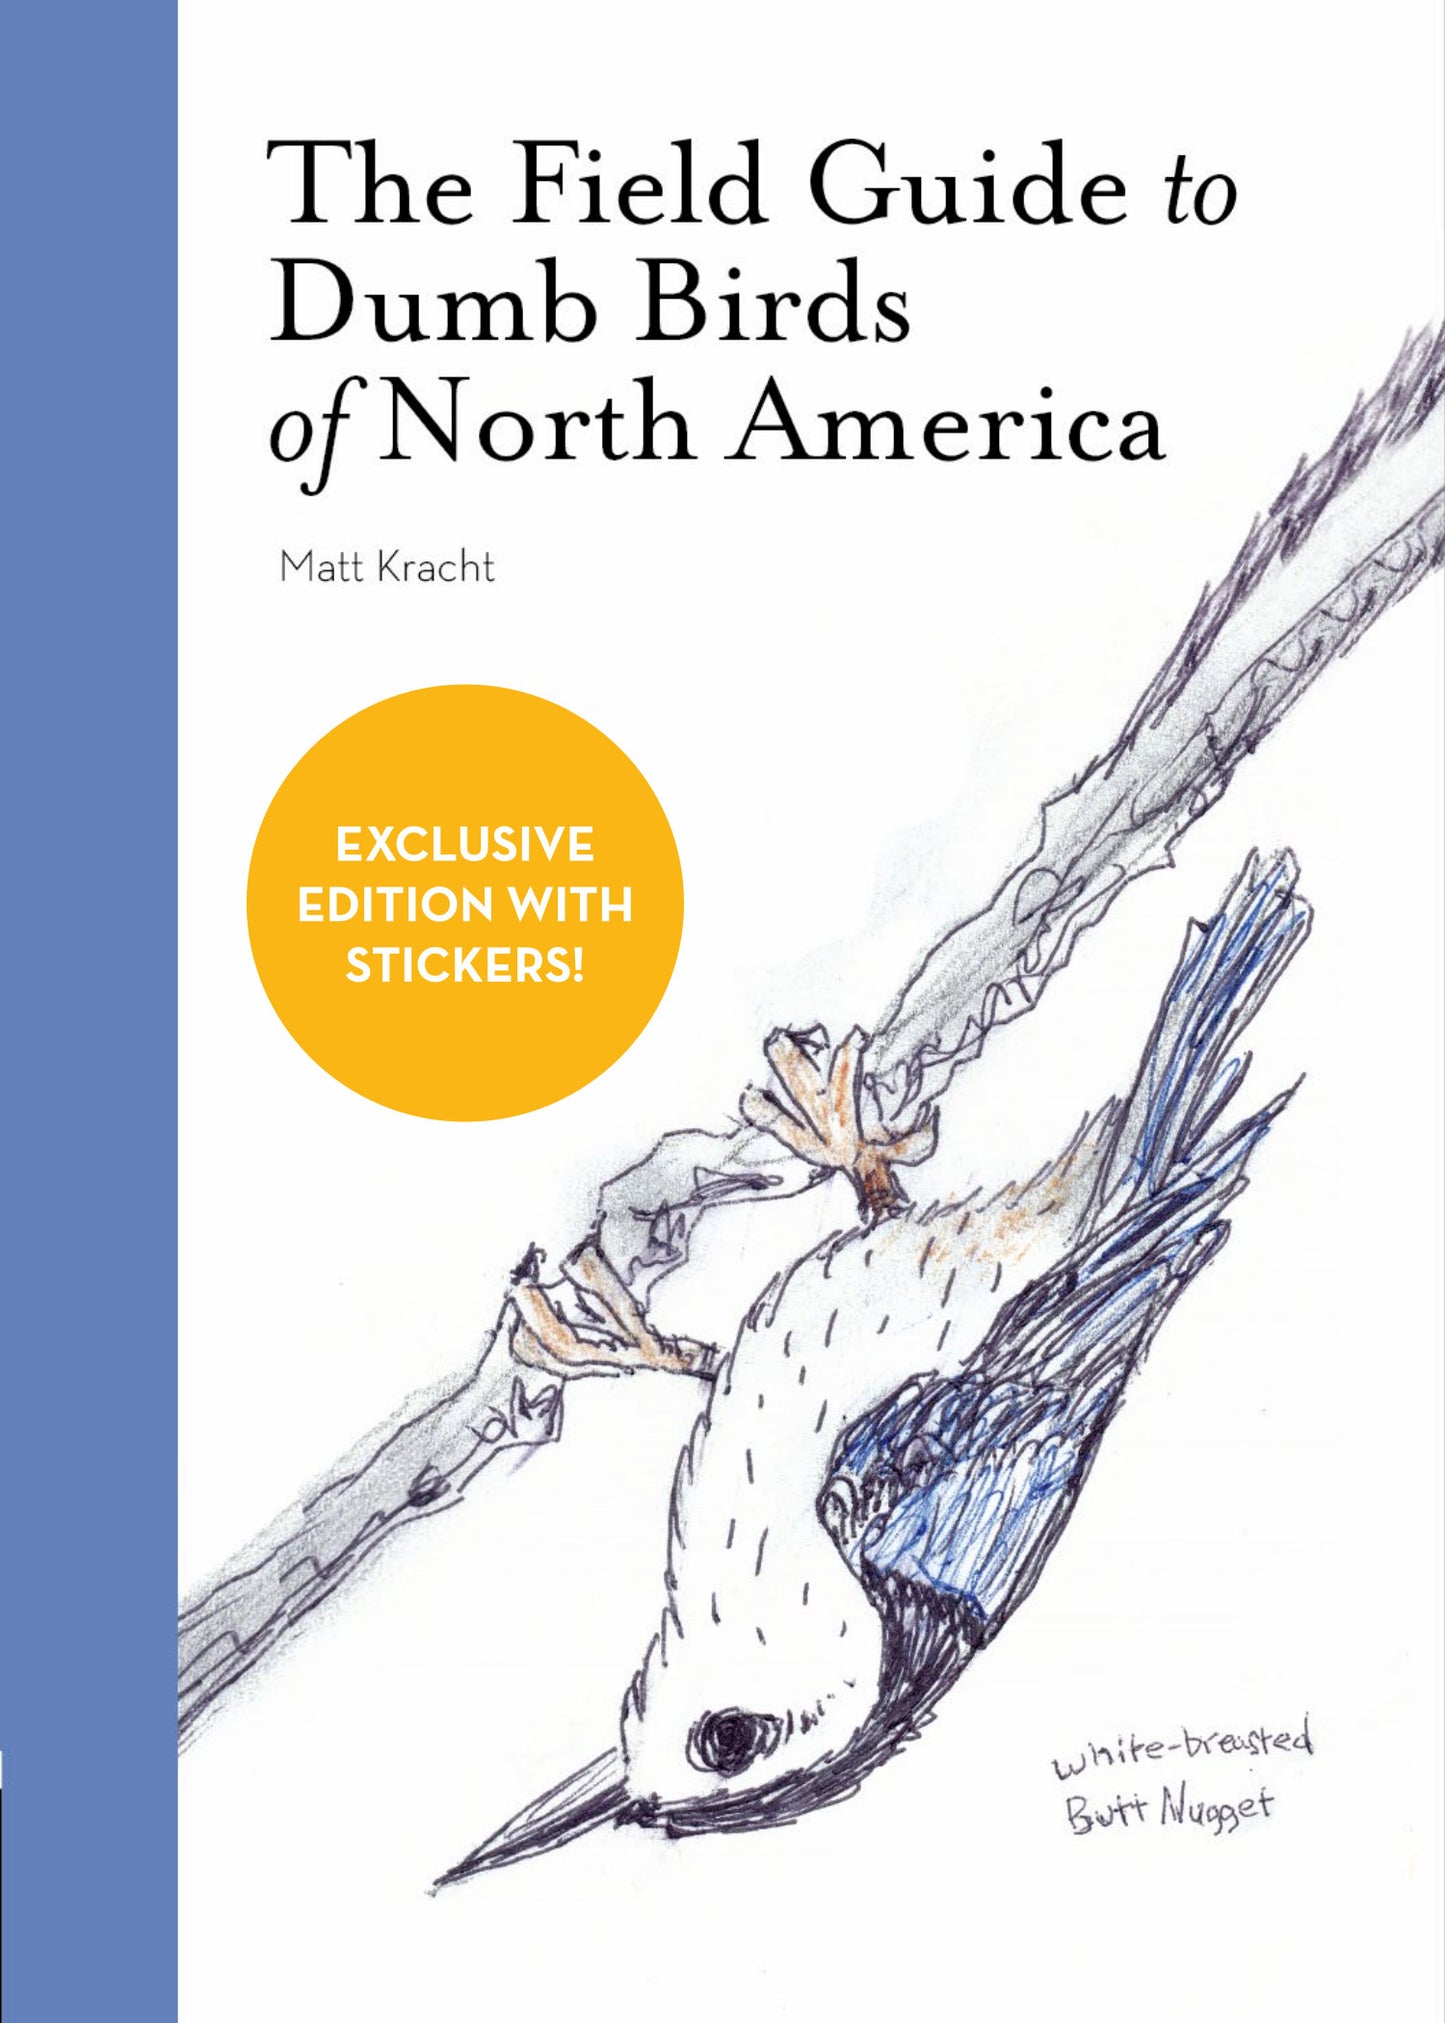 The Field Guide to Dumb Birds of North America by Matt Kracht (Signed Indie Exclusive w/ Stickers)